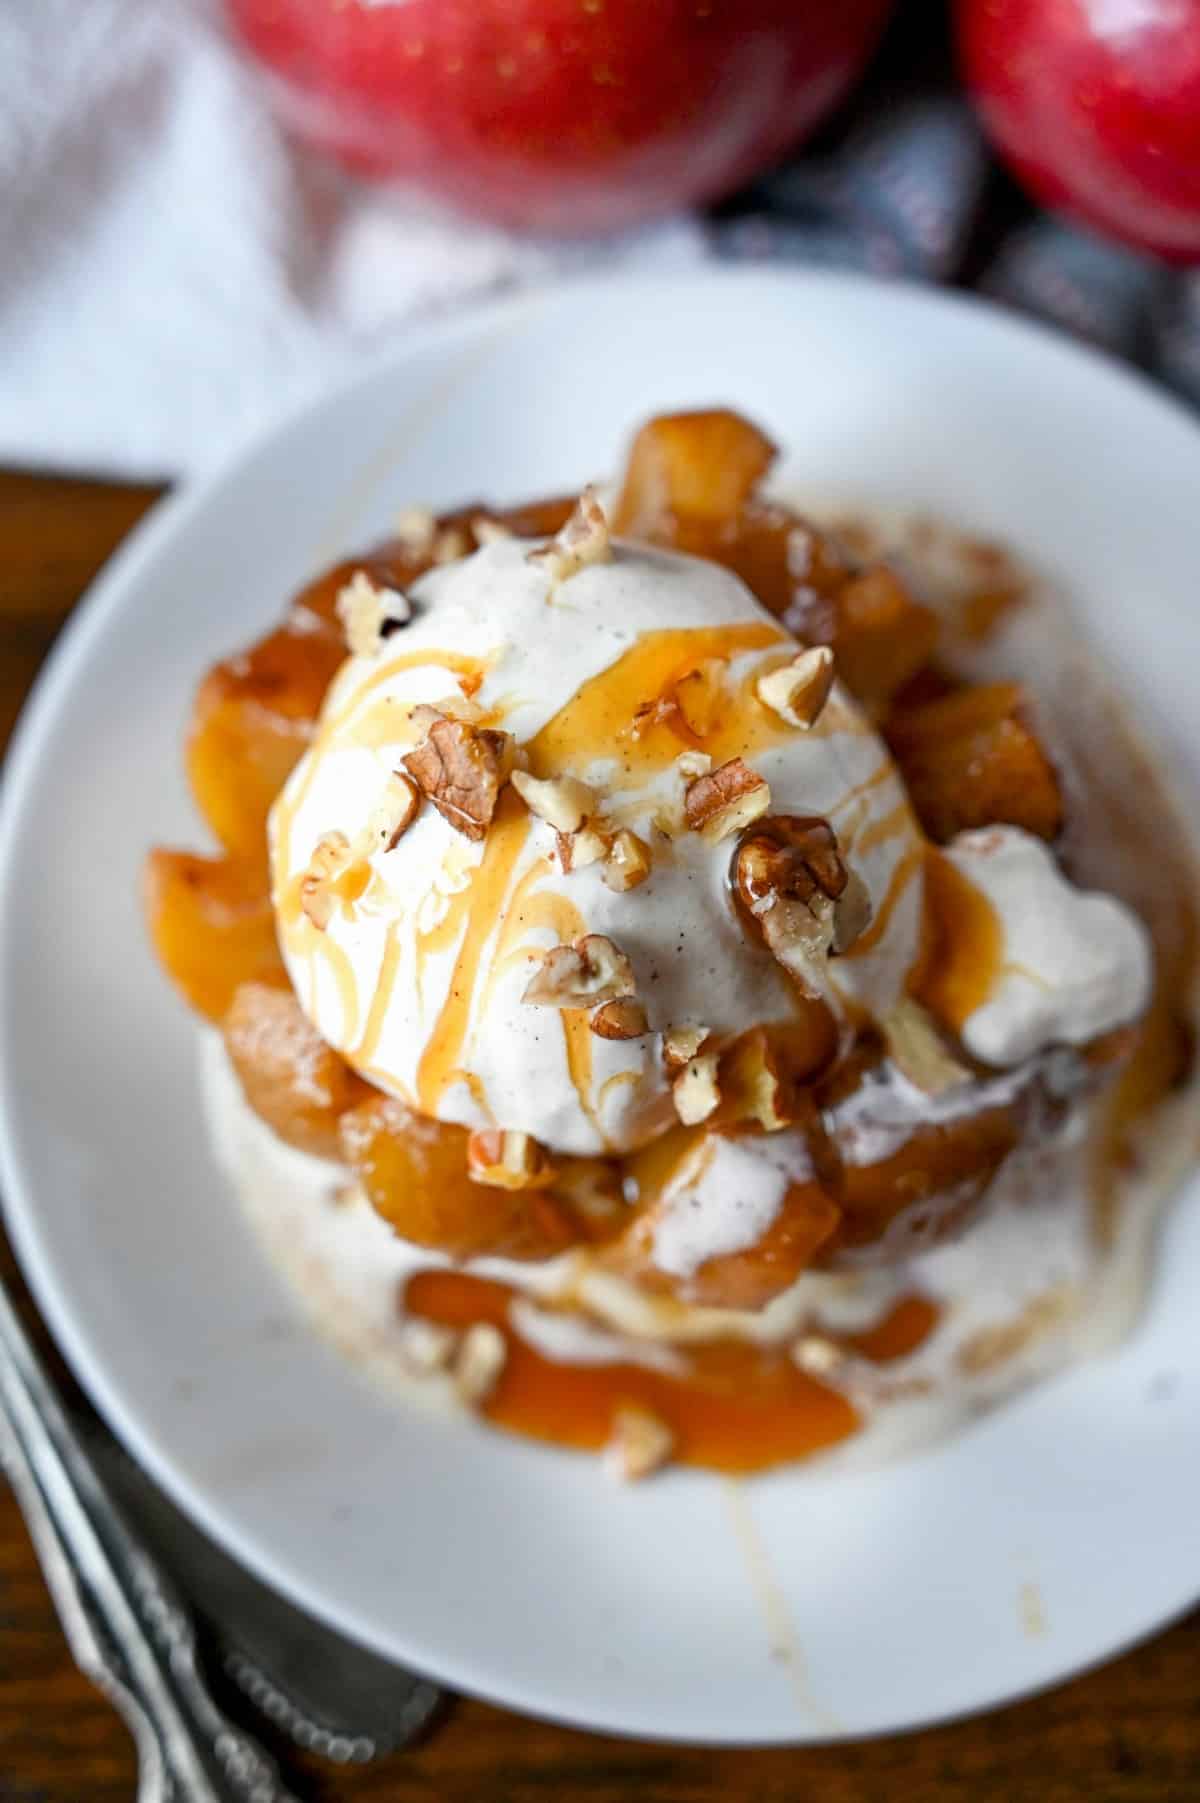 Bloomin grilled apple on a white plate with a scoop of ice cream, caramel sauce and pecans on top.